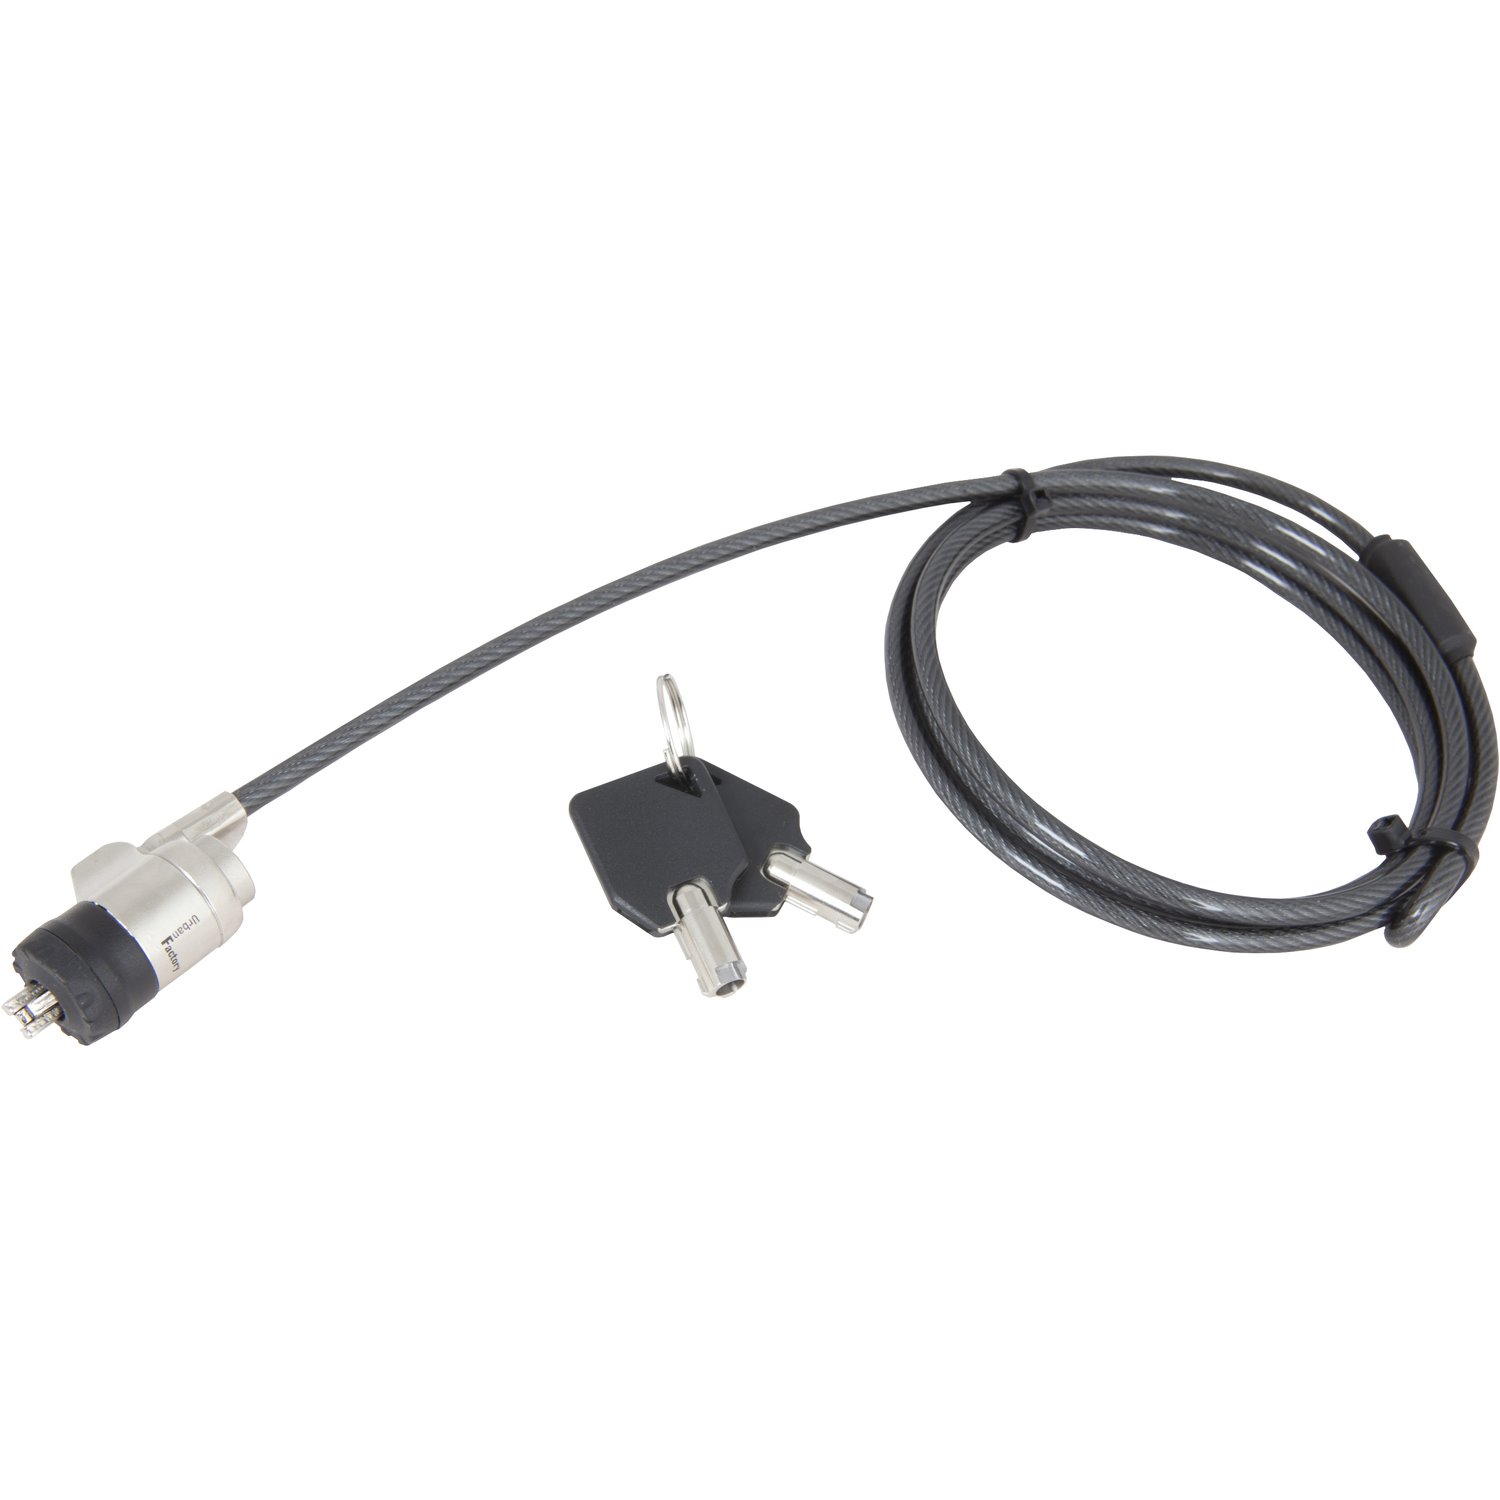 Urban Factory Security Cable - 1 Key Lock